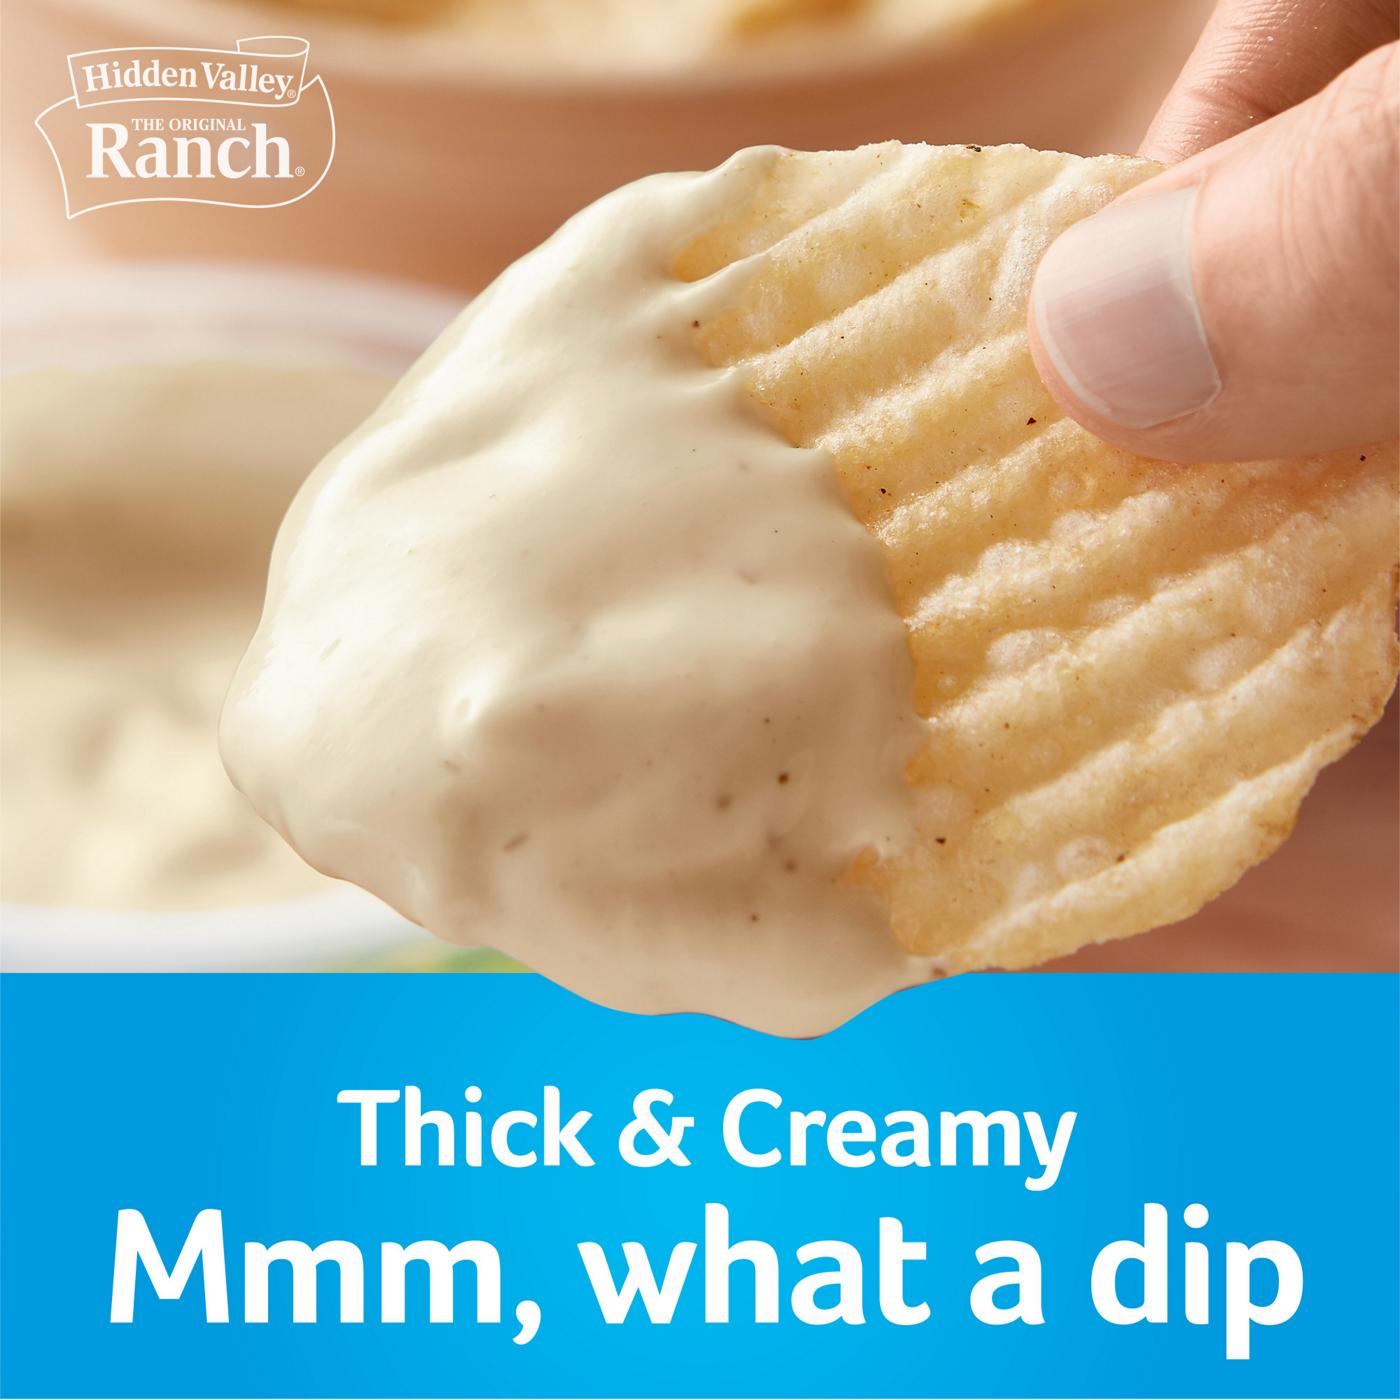 Hidden Valley Thick & Creamy Ready-to-Eat Classic Ranch Dip; image 2 of 8